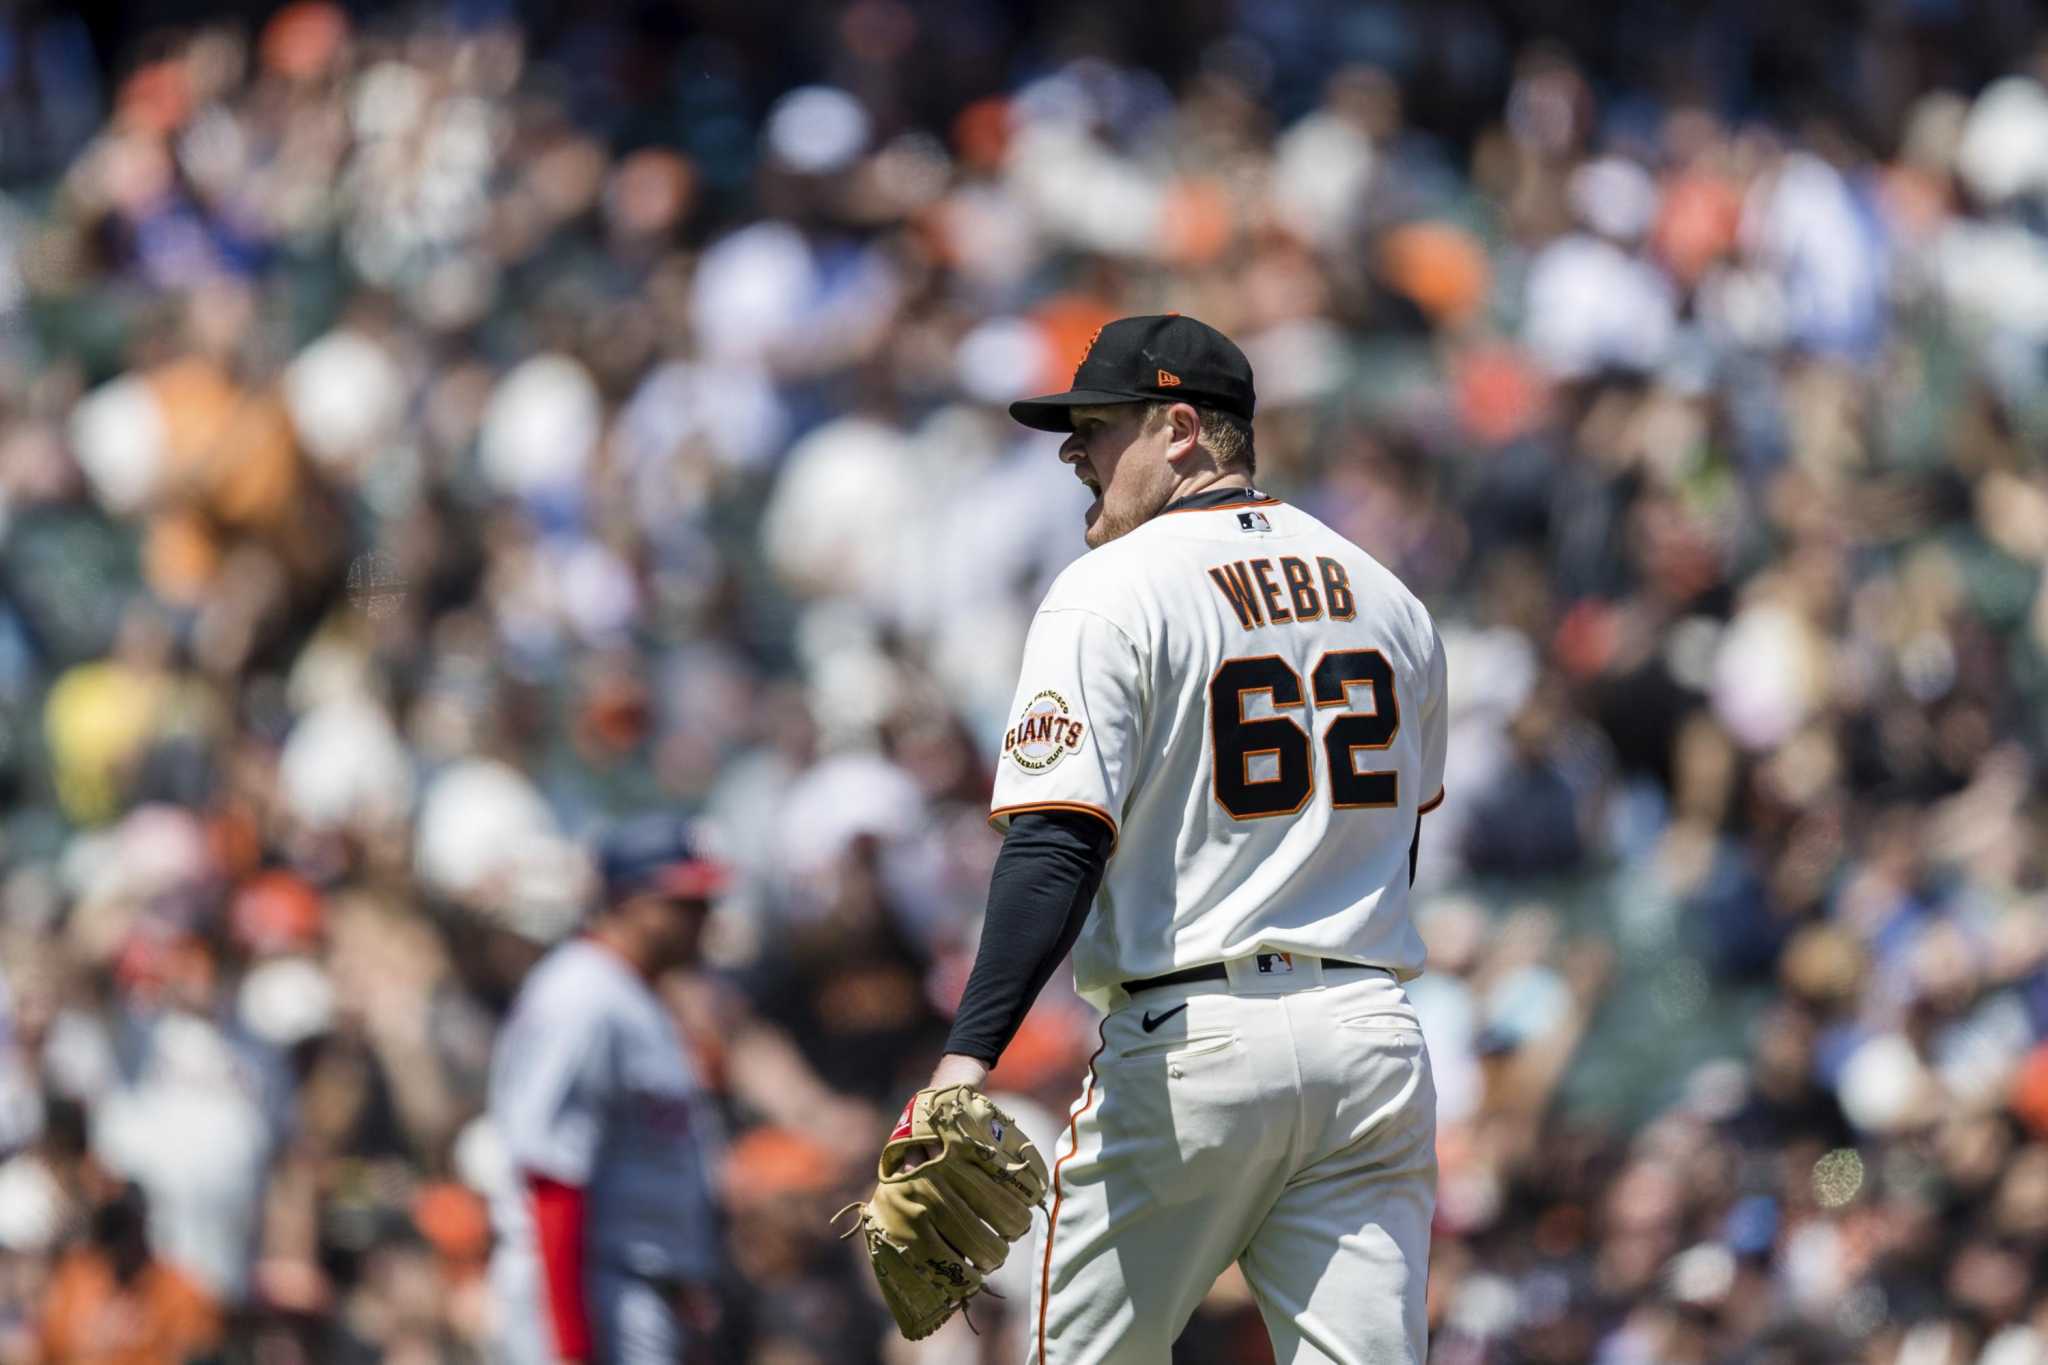 Giants' Logan Webb vows to fight against fentanyl after family tragedy -  The Athletic